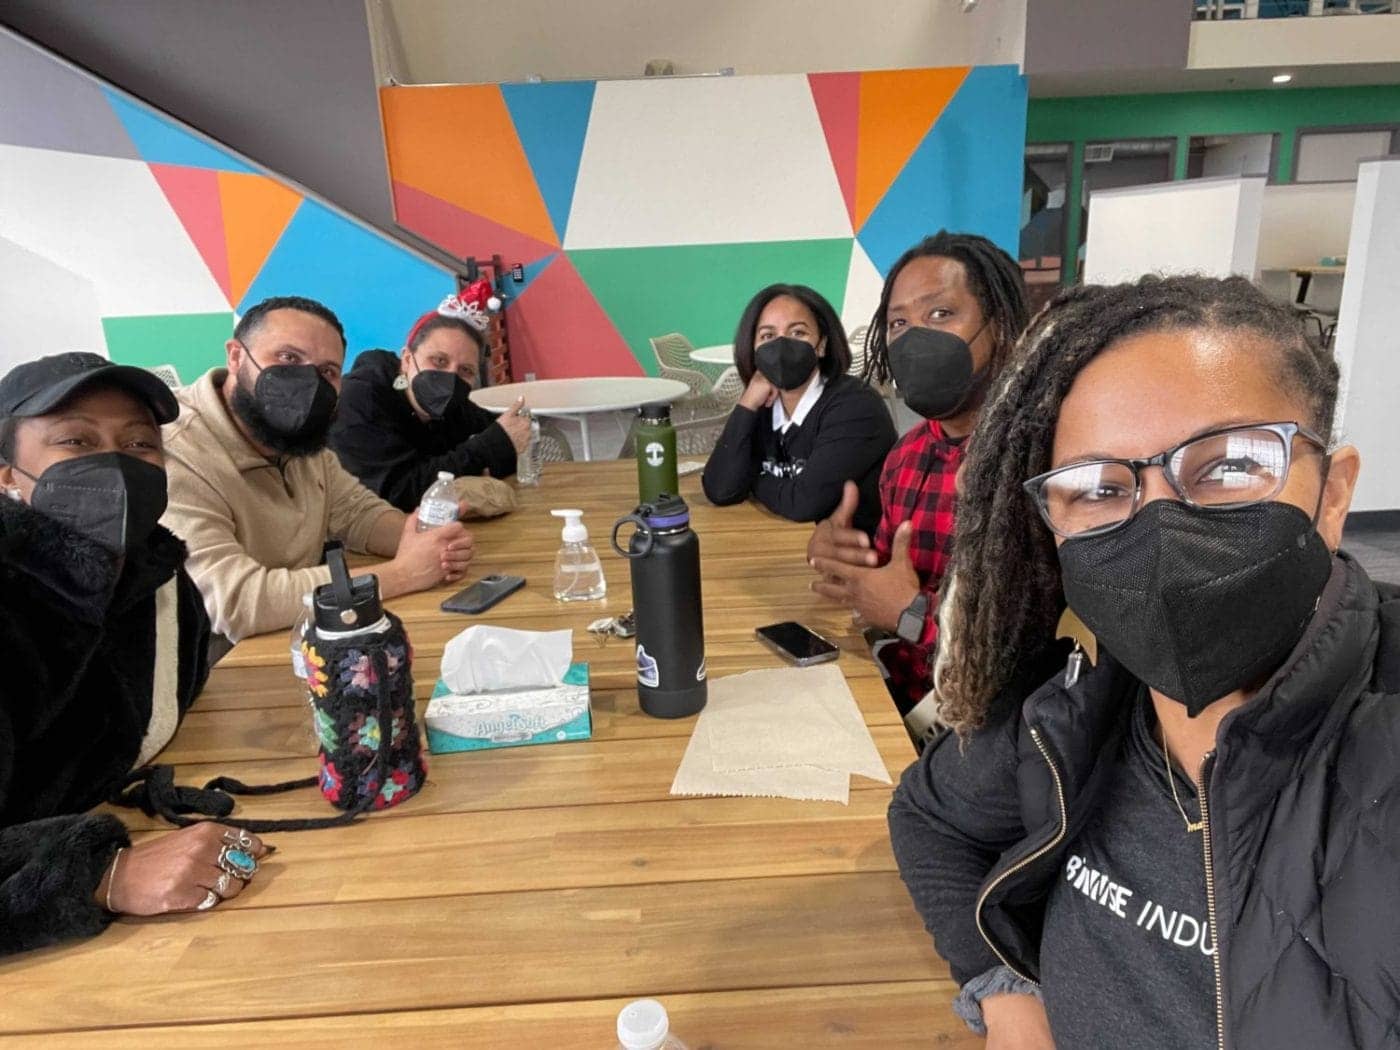 Bitwise-Industries-employees-Oakland-VP-meet-1400x1050, <strong>Tech comes to West Oakland: Bitwise Industries offers classes and job placement</strong>, Local News & Views 